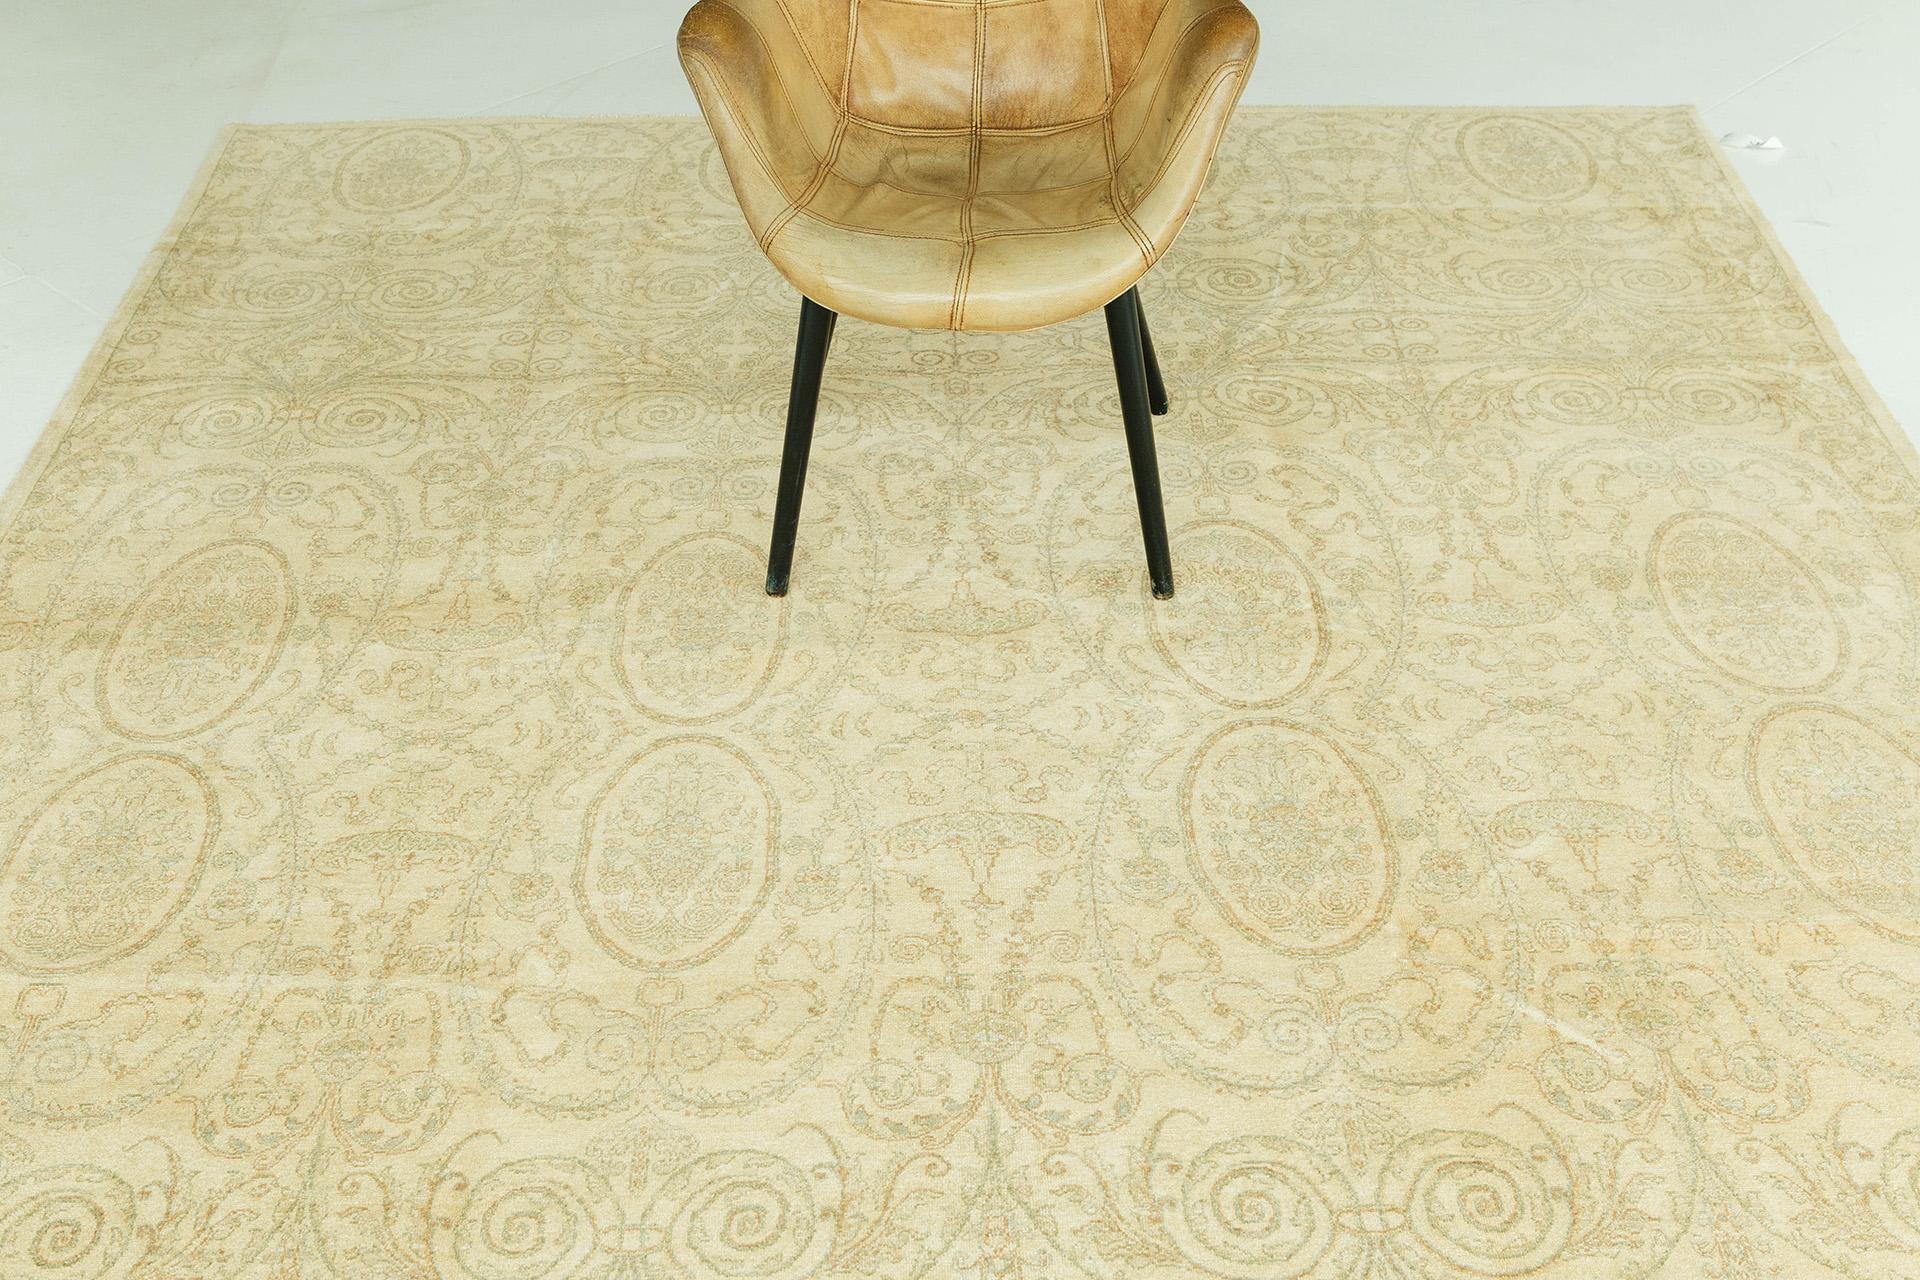 Contemporary Natural Dye Transitional Rug Design D5161 Fable For Sale